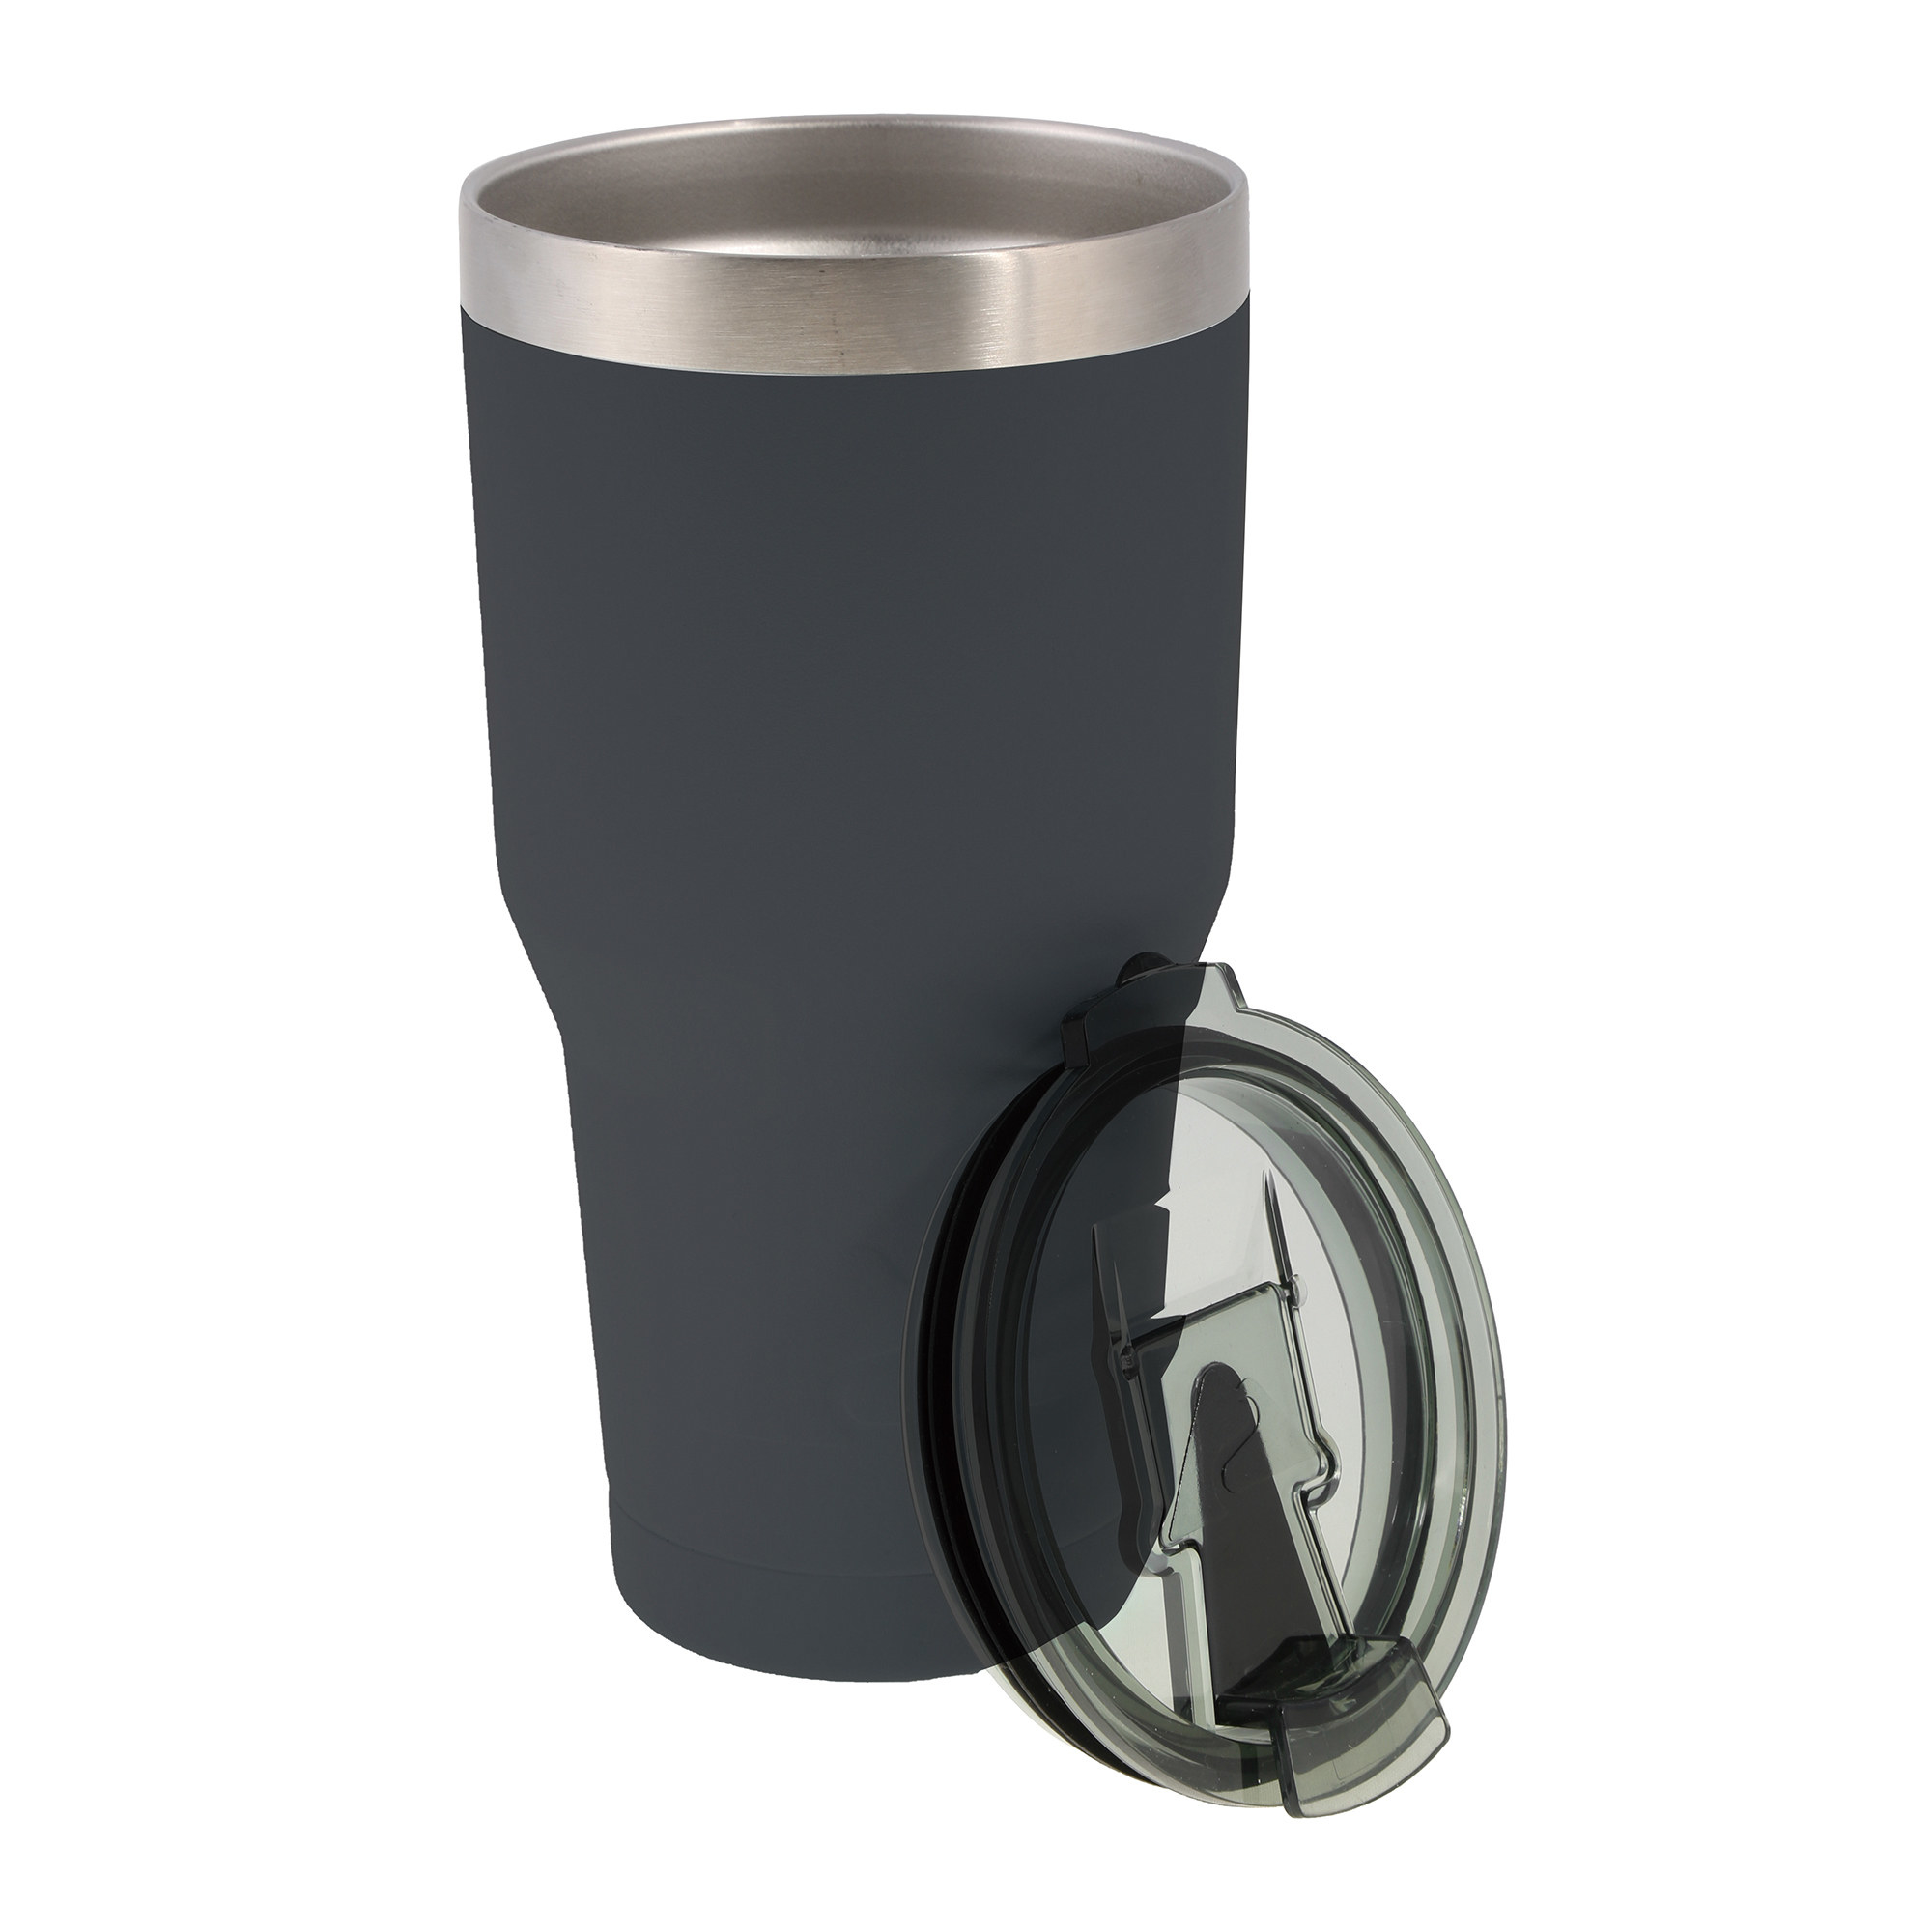 The tumbler in gray with lid